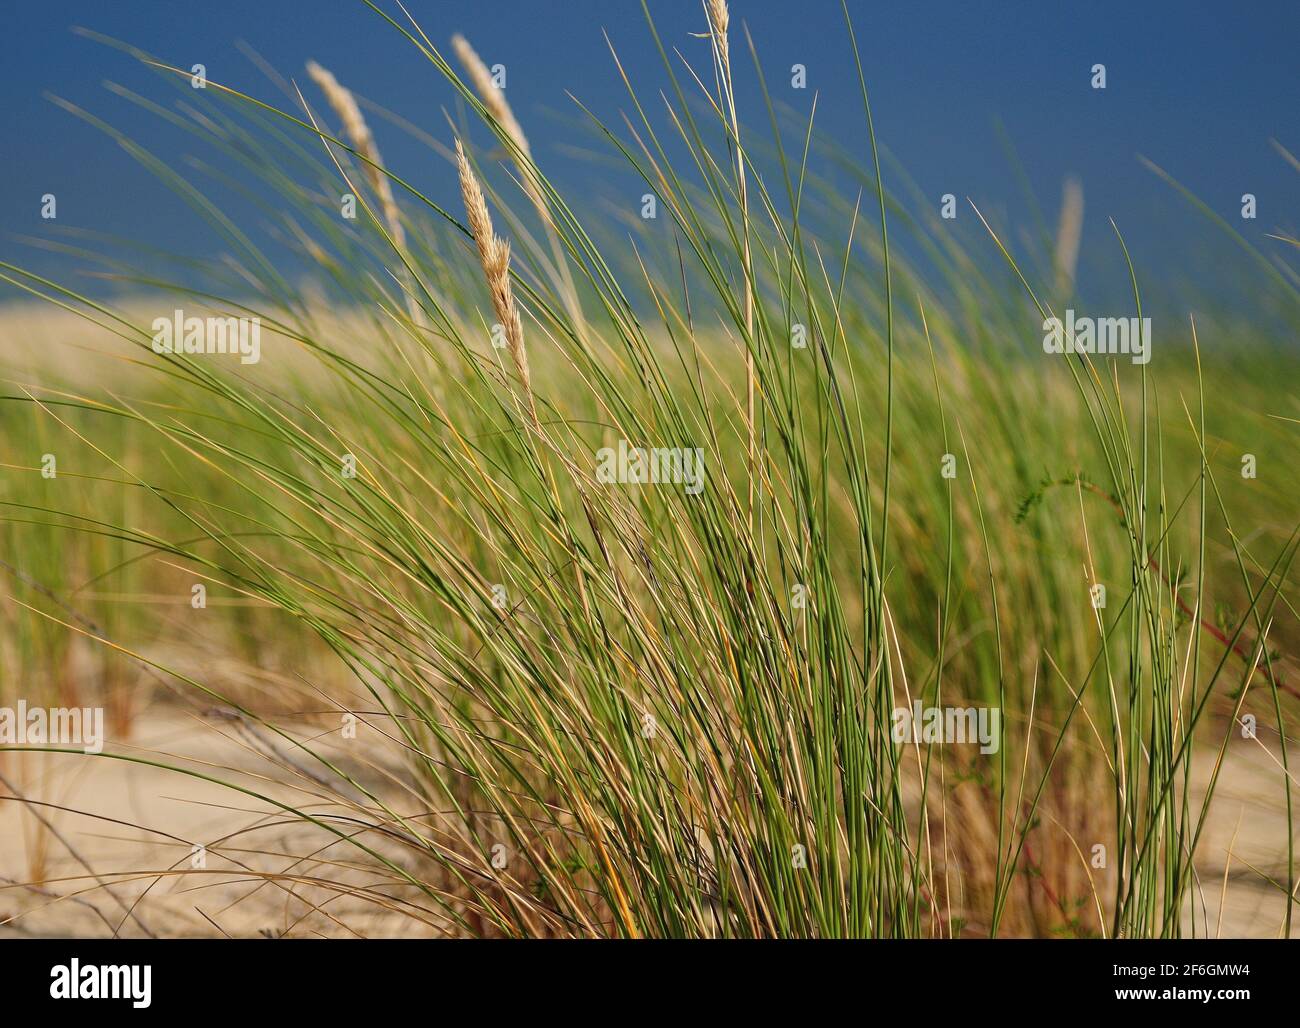 Maram Grass In The Dunes On The Beach Of Cap Ferret France During A Sunny Day Stock Photo